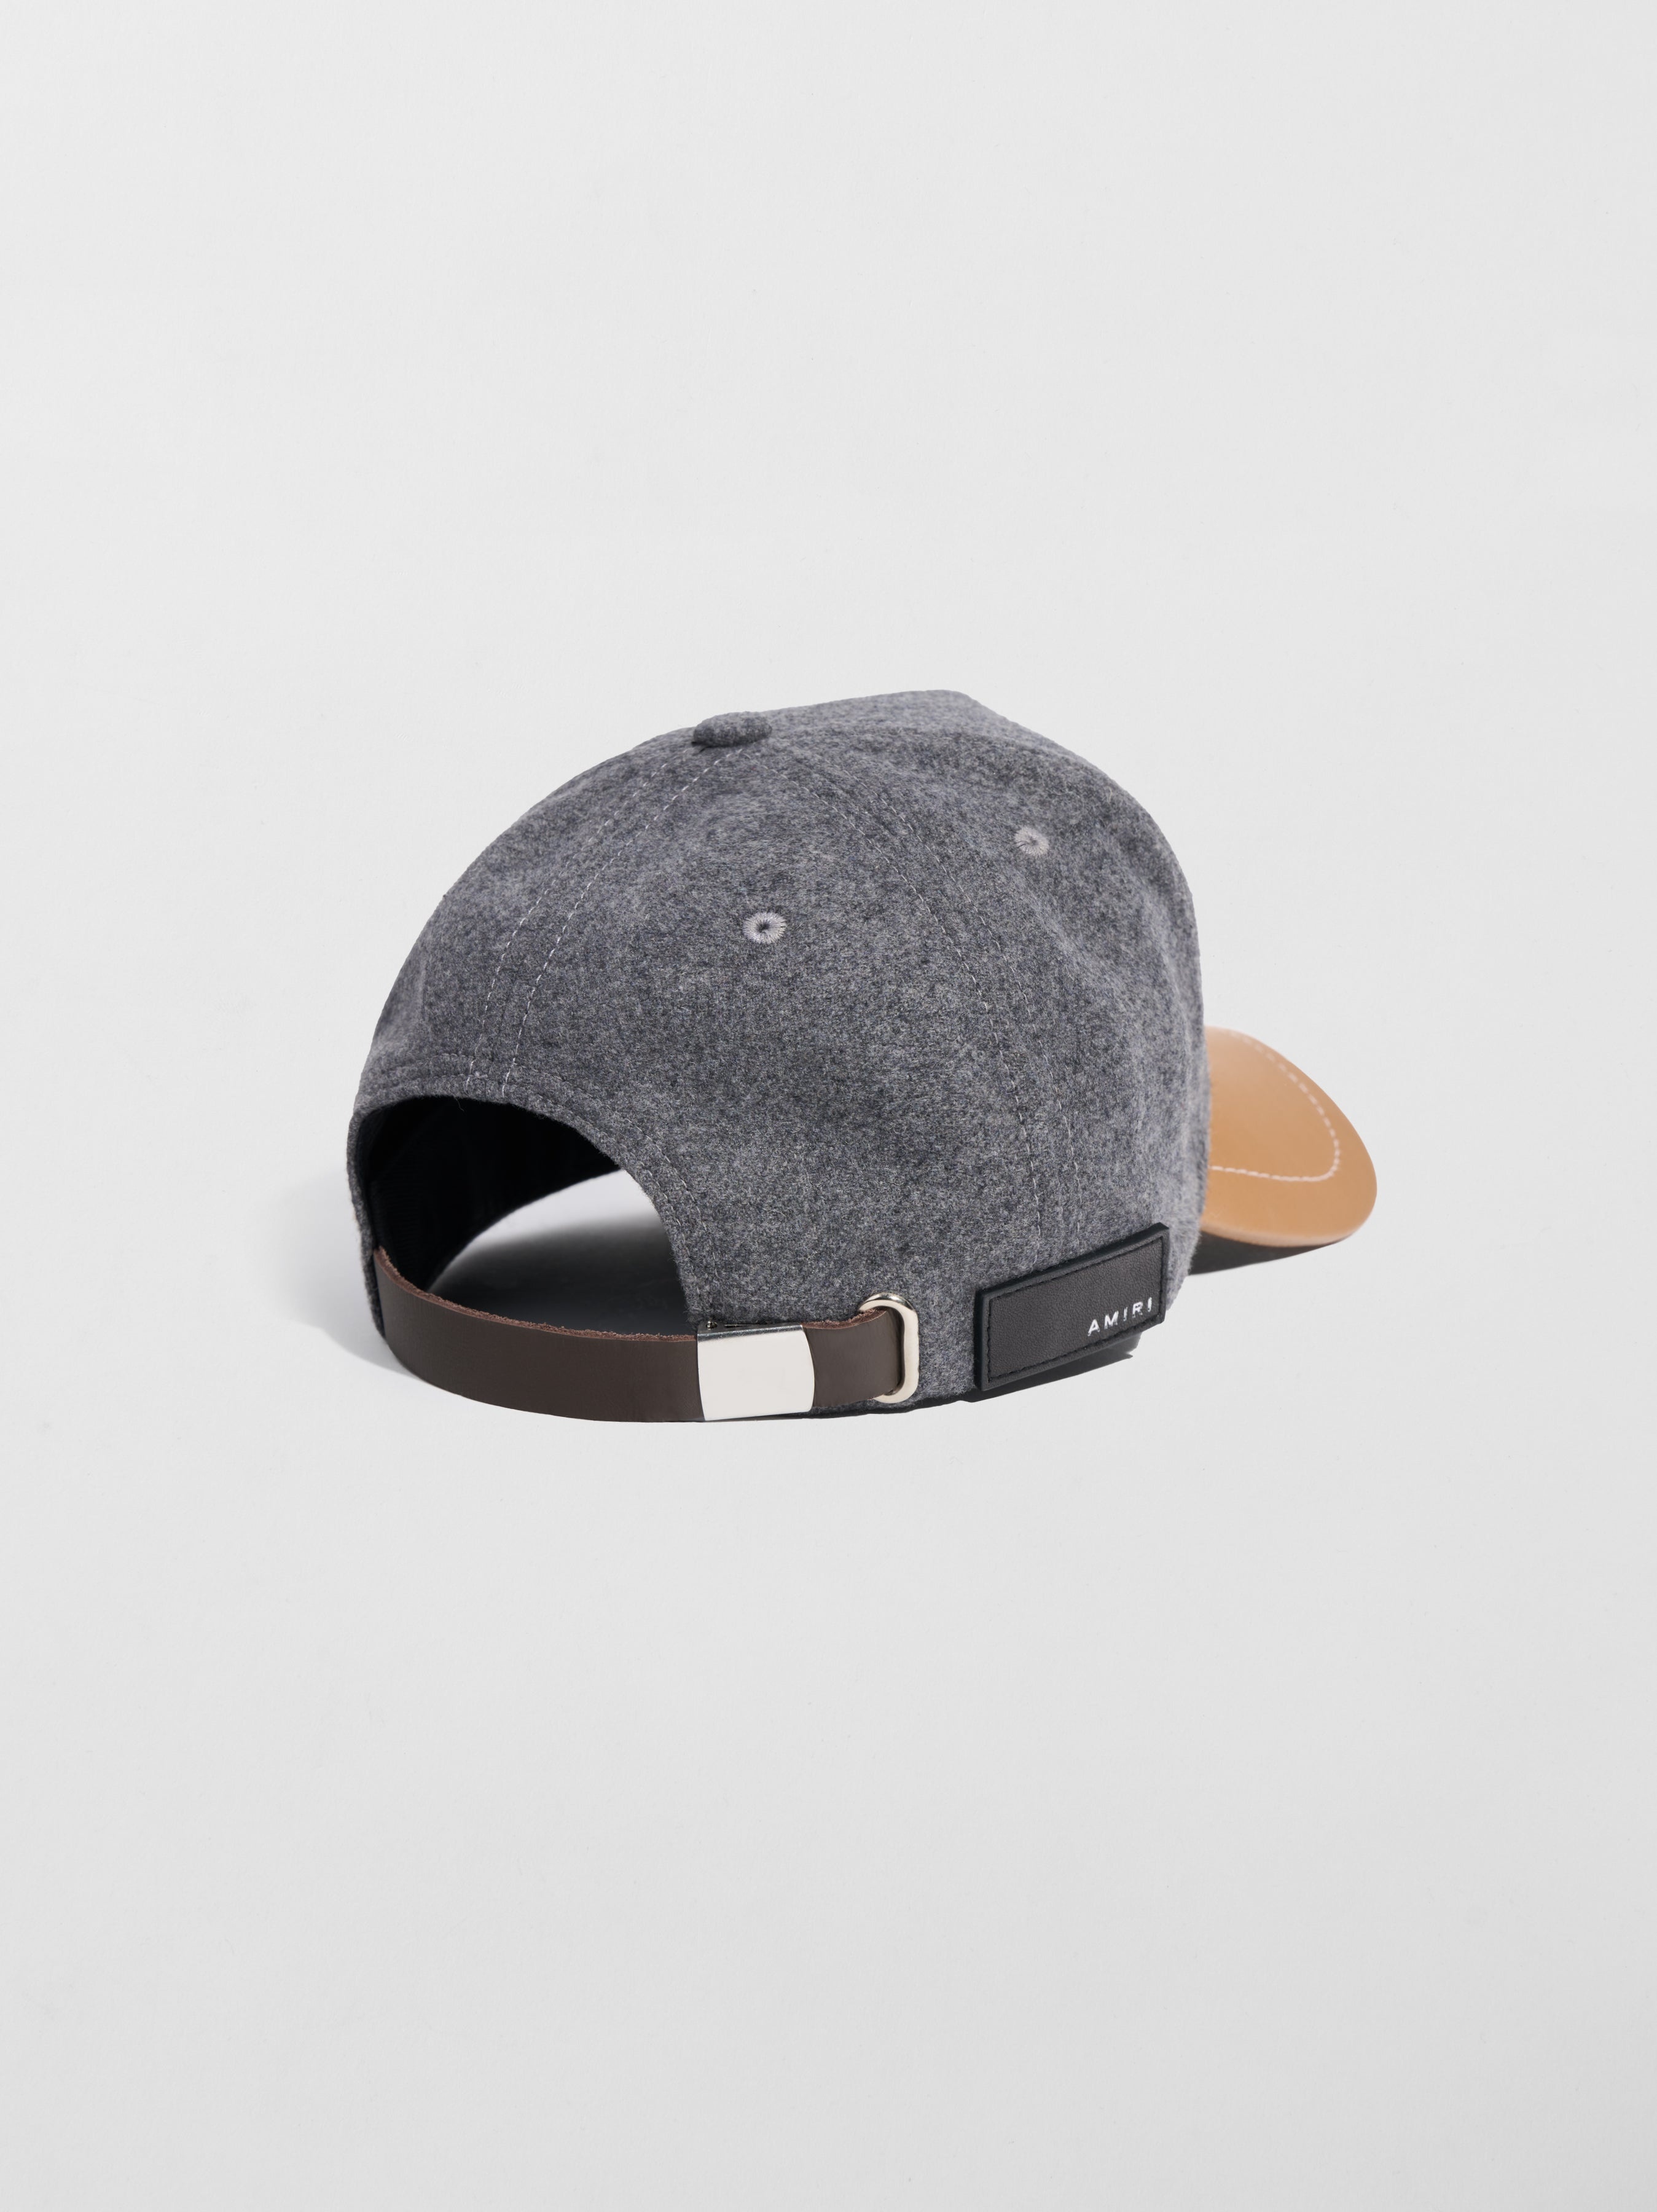 WOOL/LEATHER MA HAT - 3